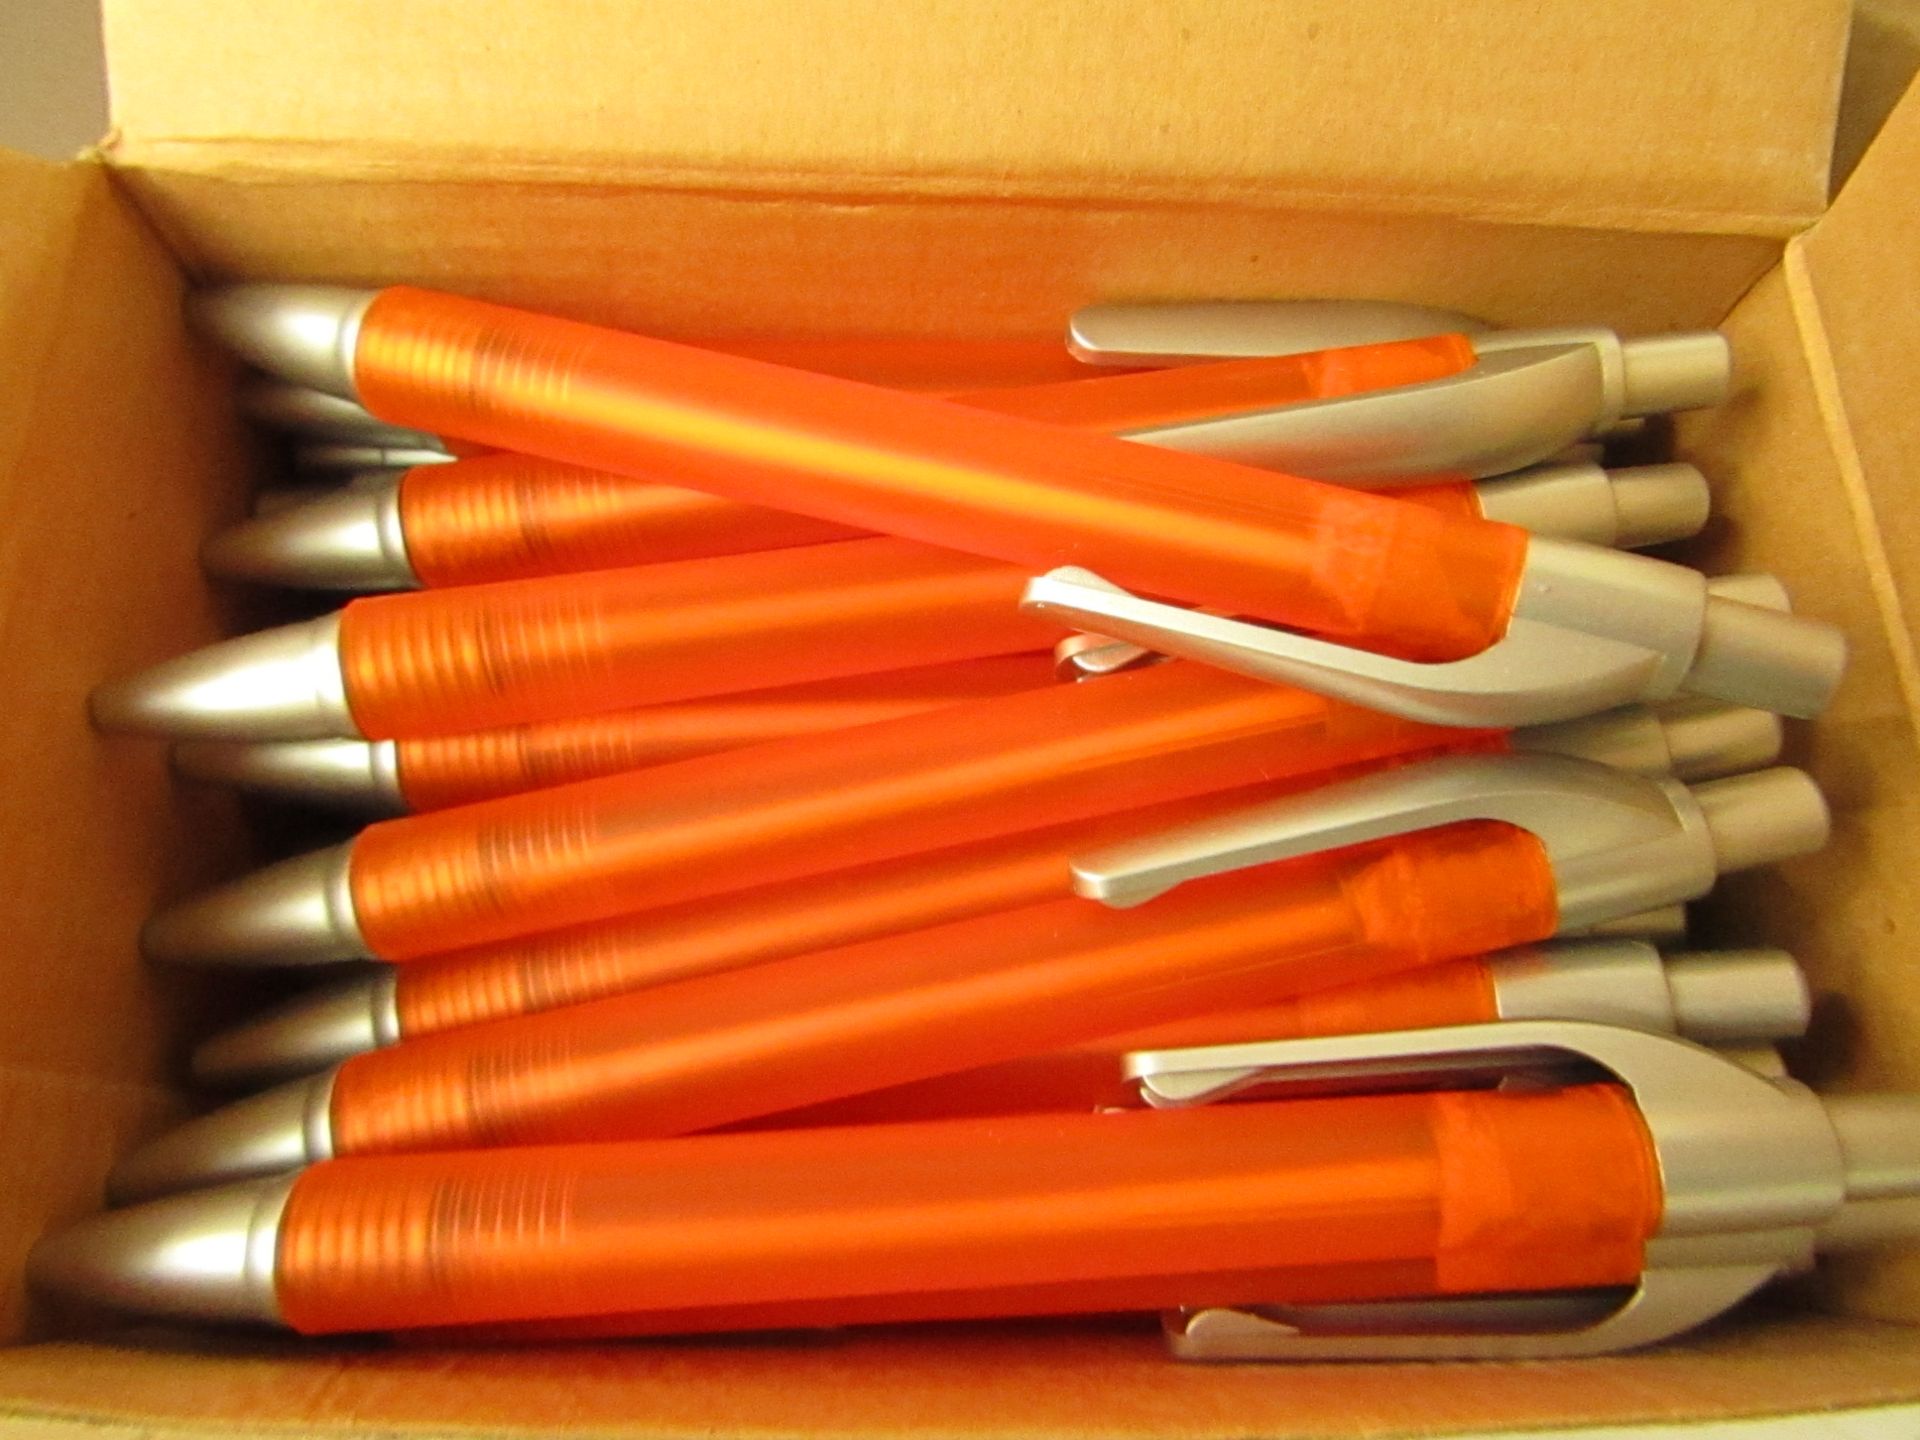 Box of 50 Black Ink Pens. Boxed. See Image For Design